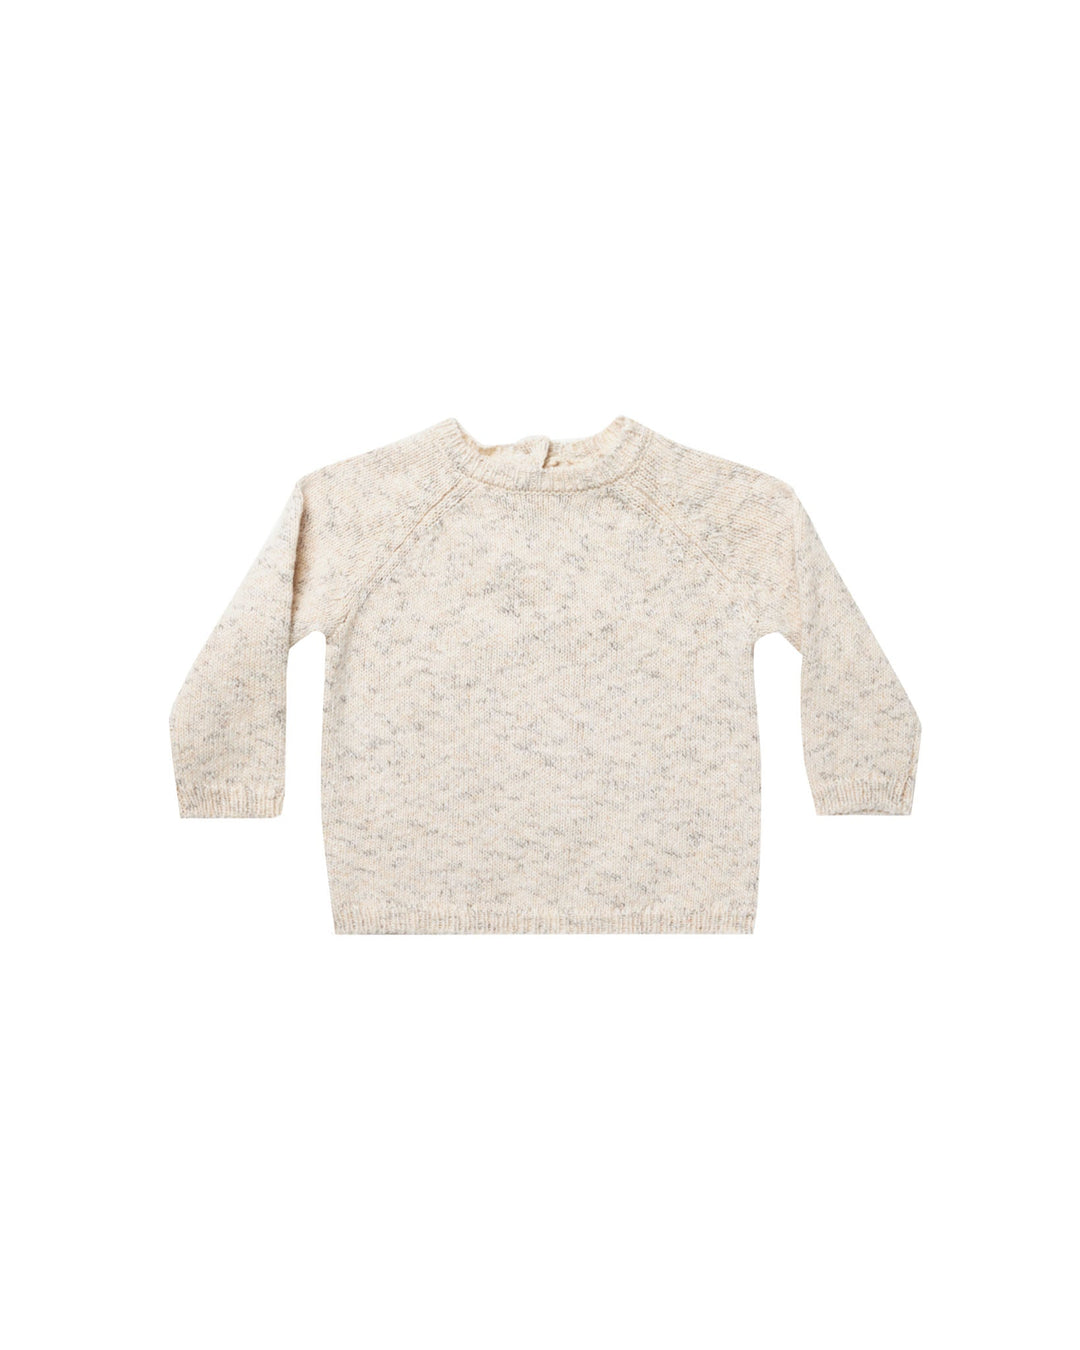 Quincy Mae Sweater Speckled Knit Sweater - Natural